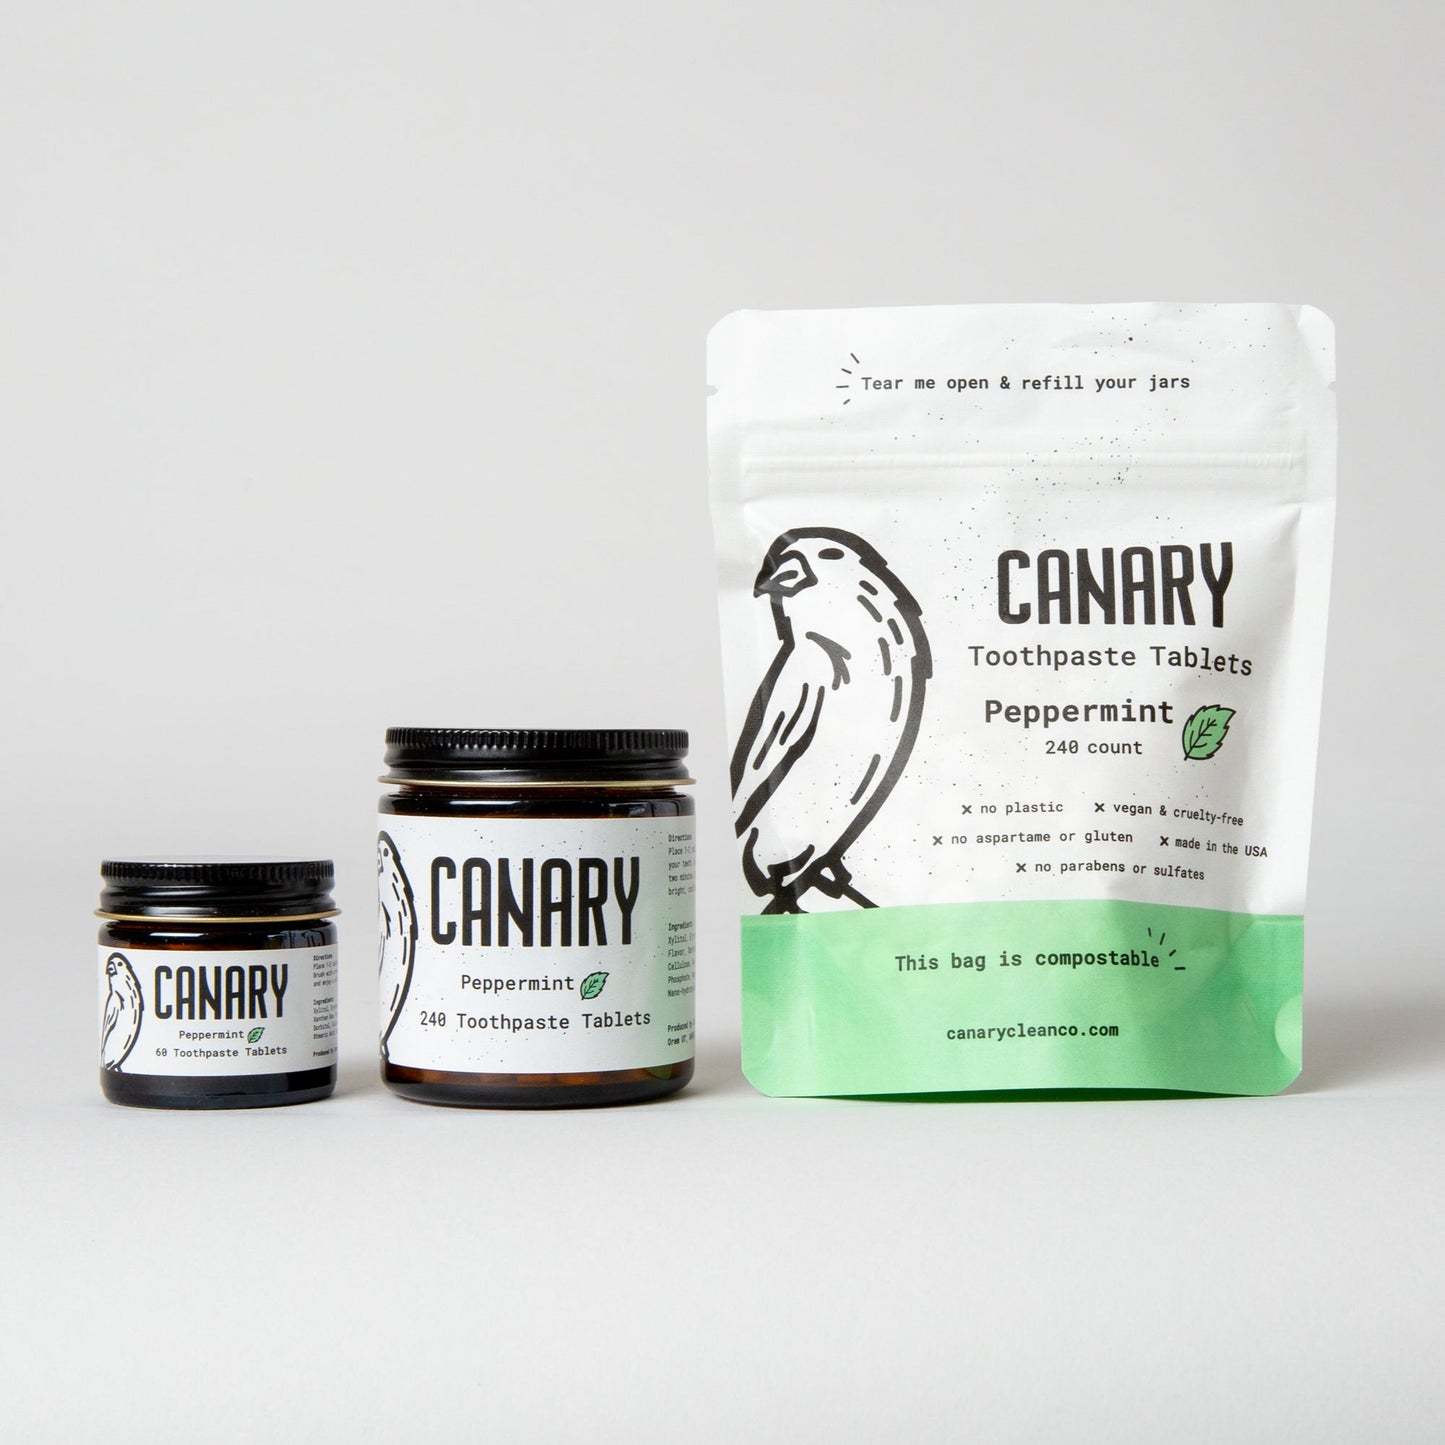 peppermint toothpaste tablets by canary